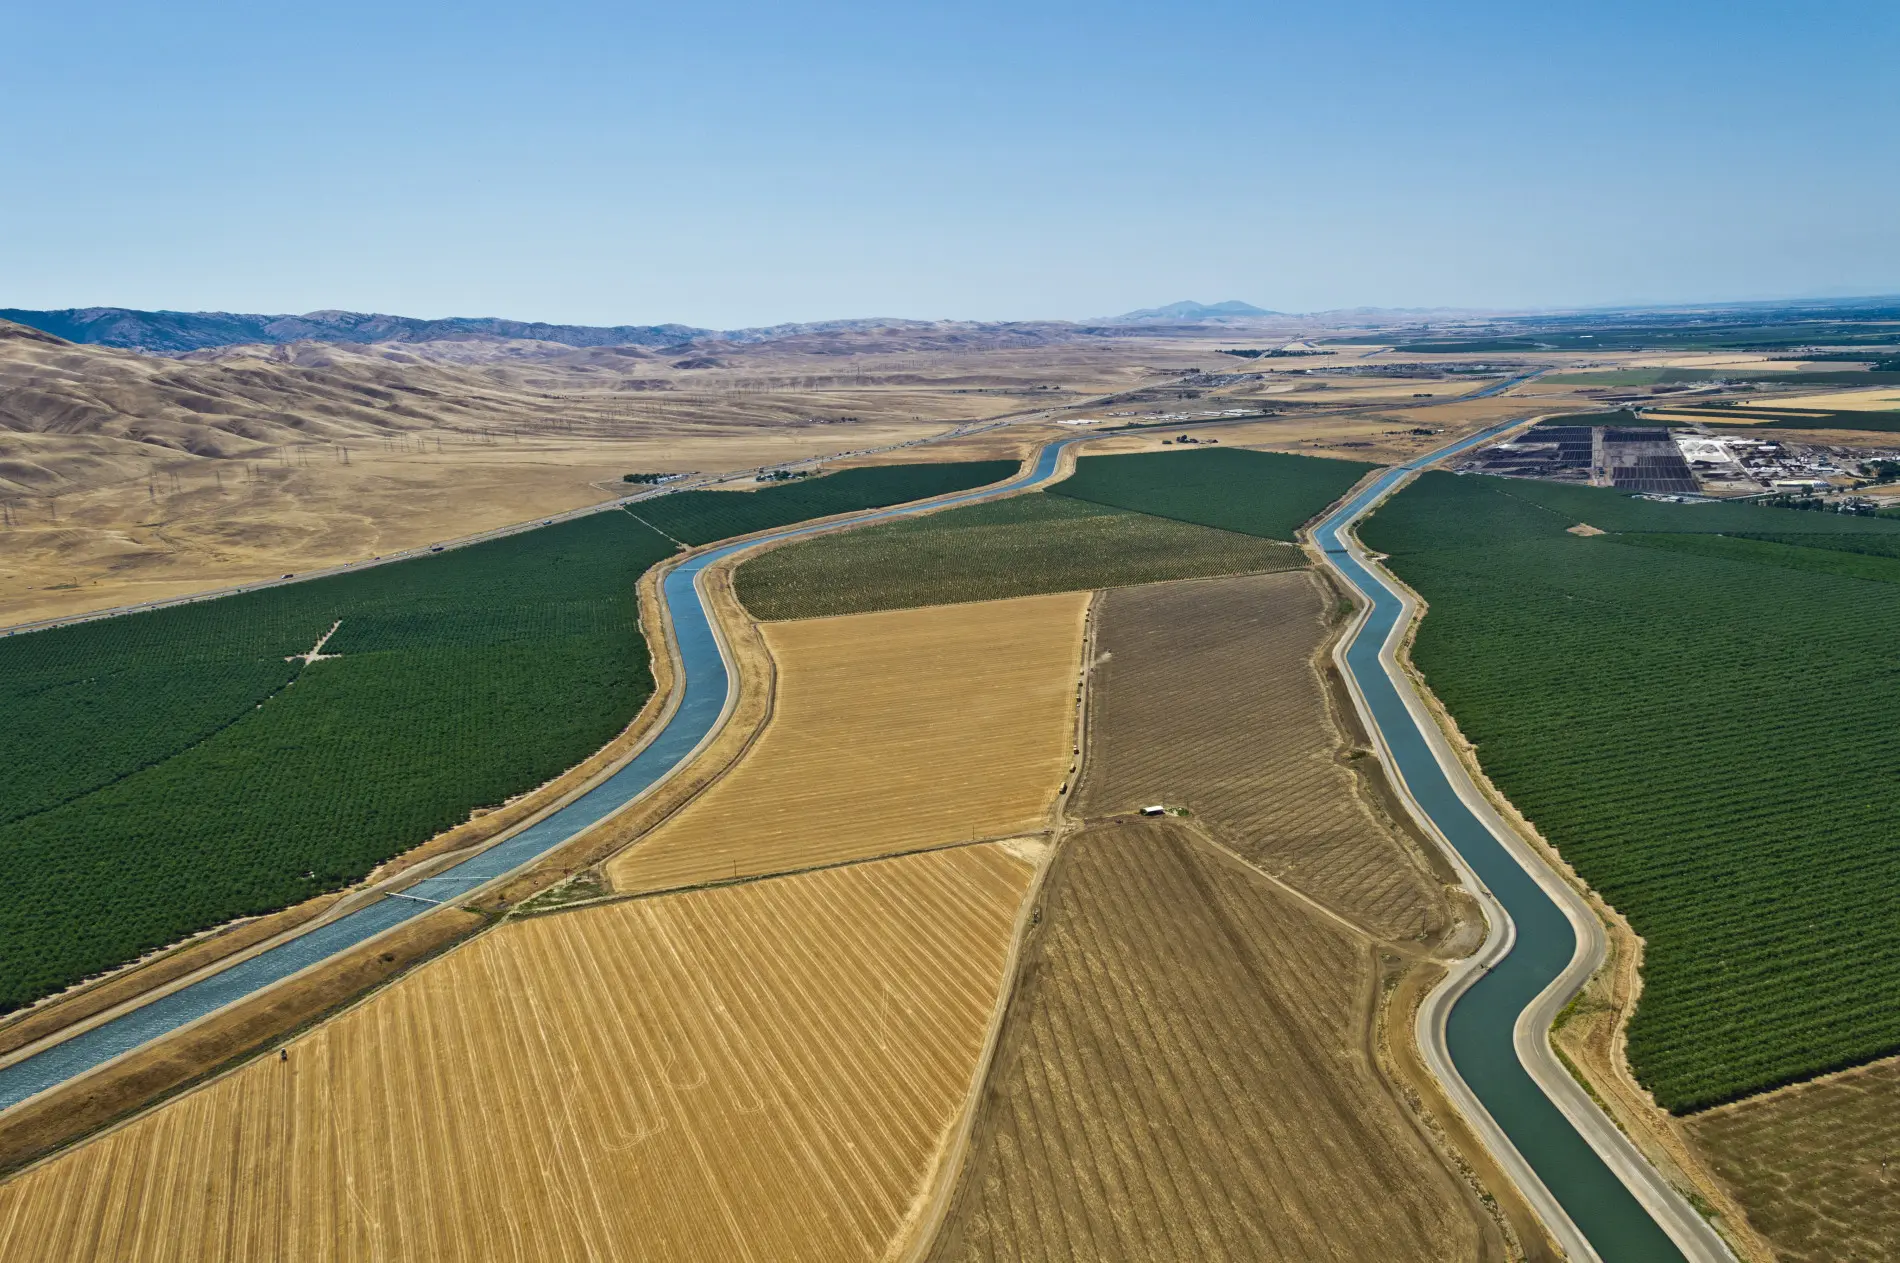 Solar panels could cover California's water canals, here's why